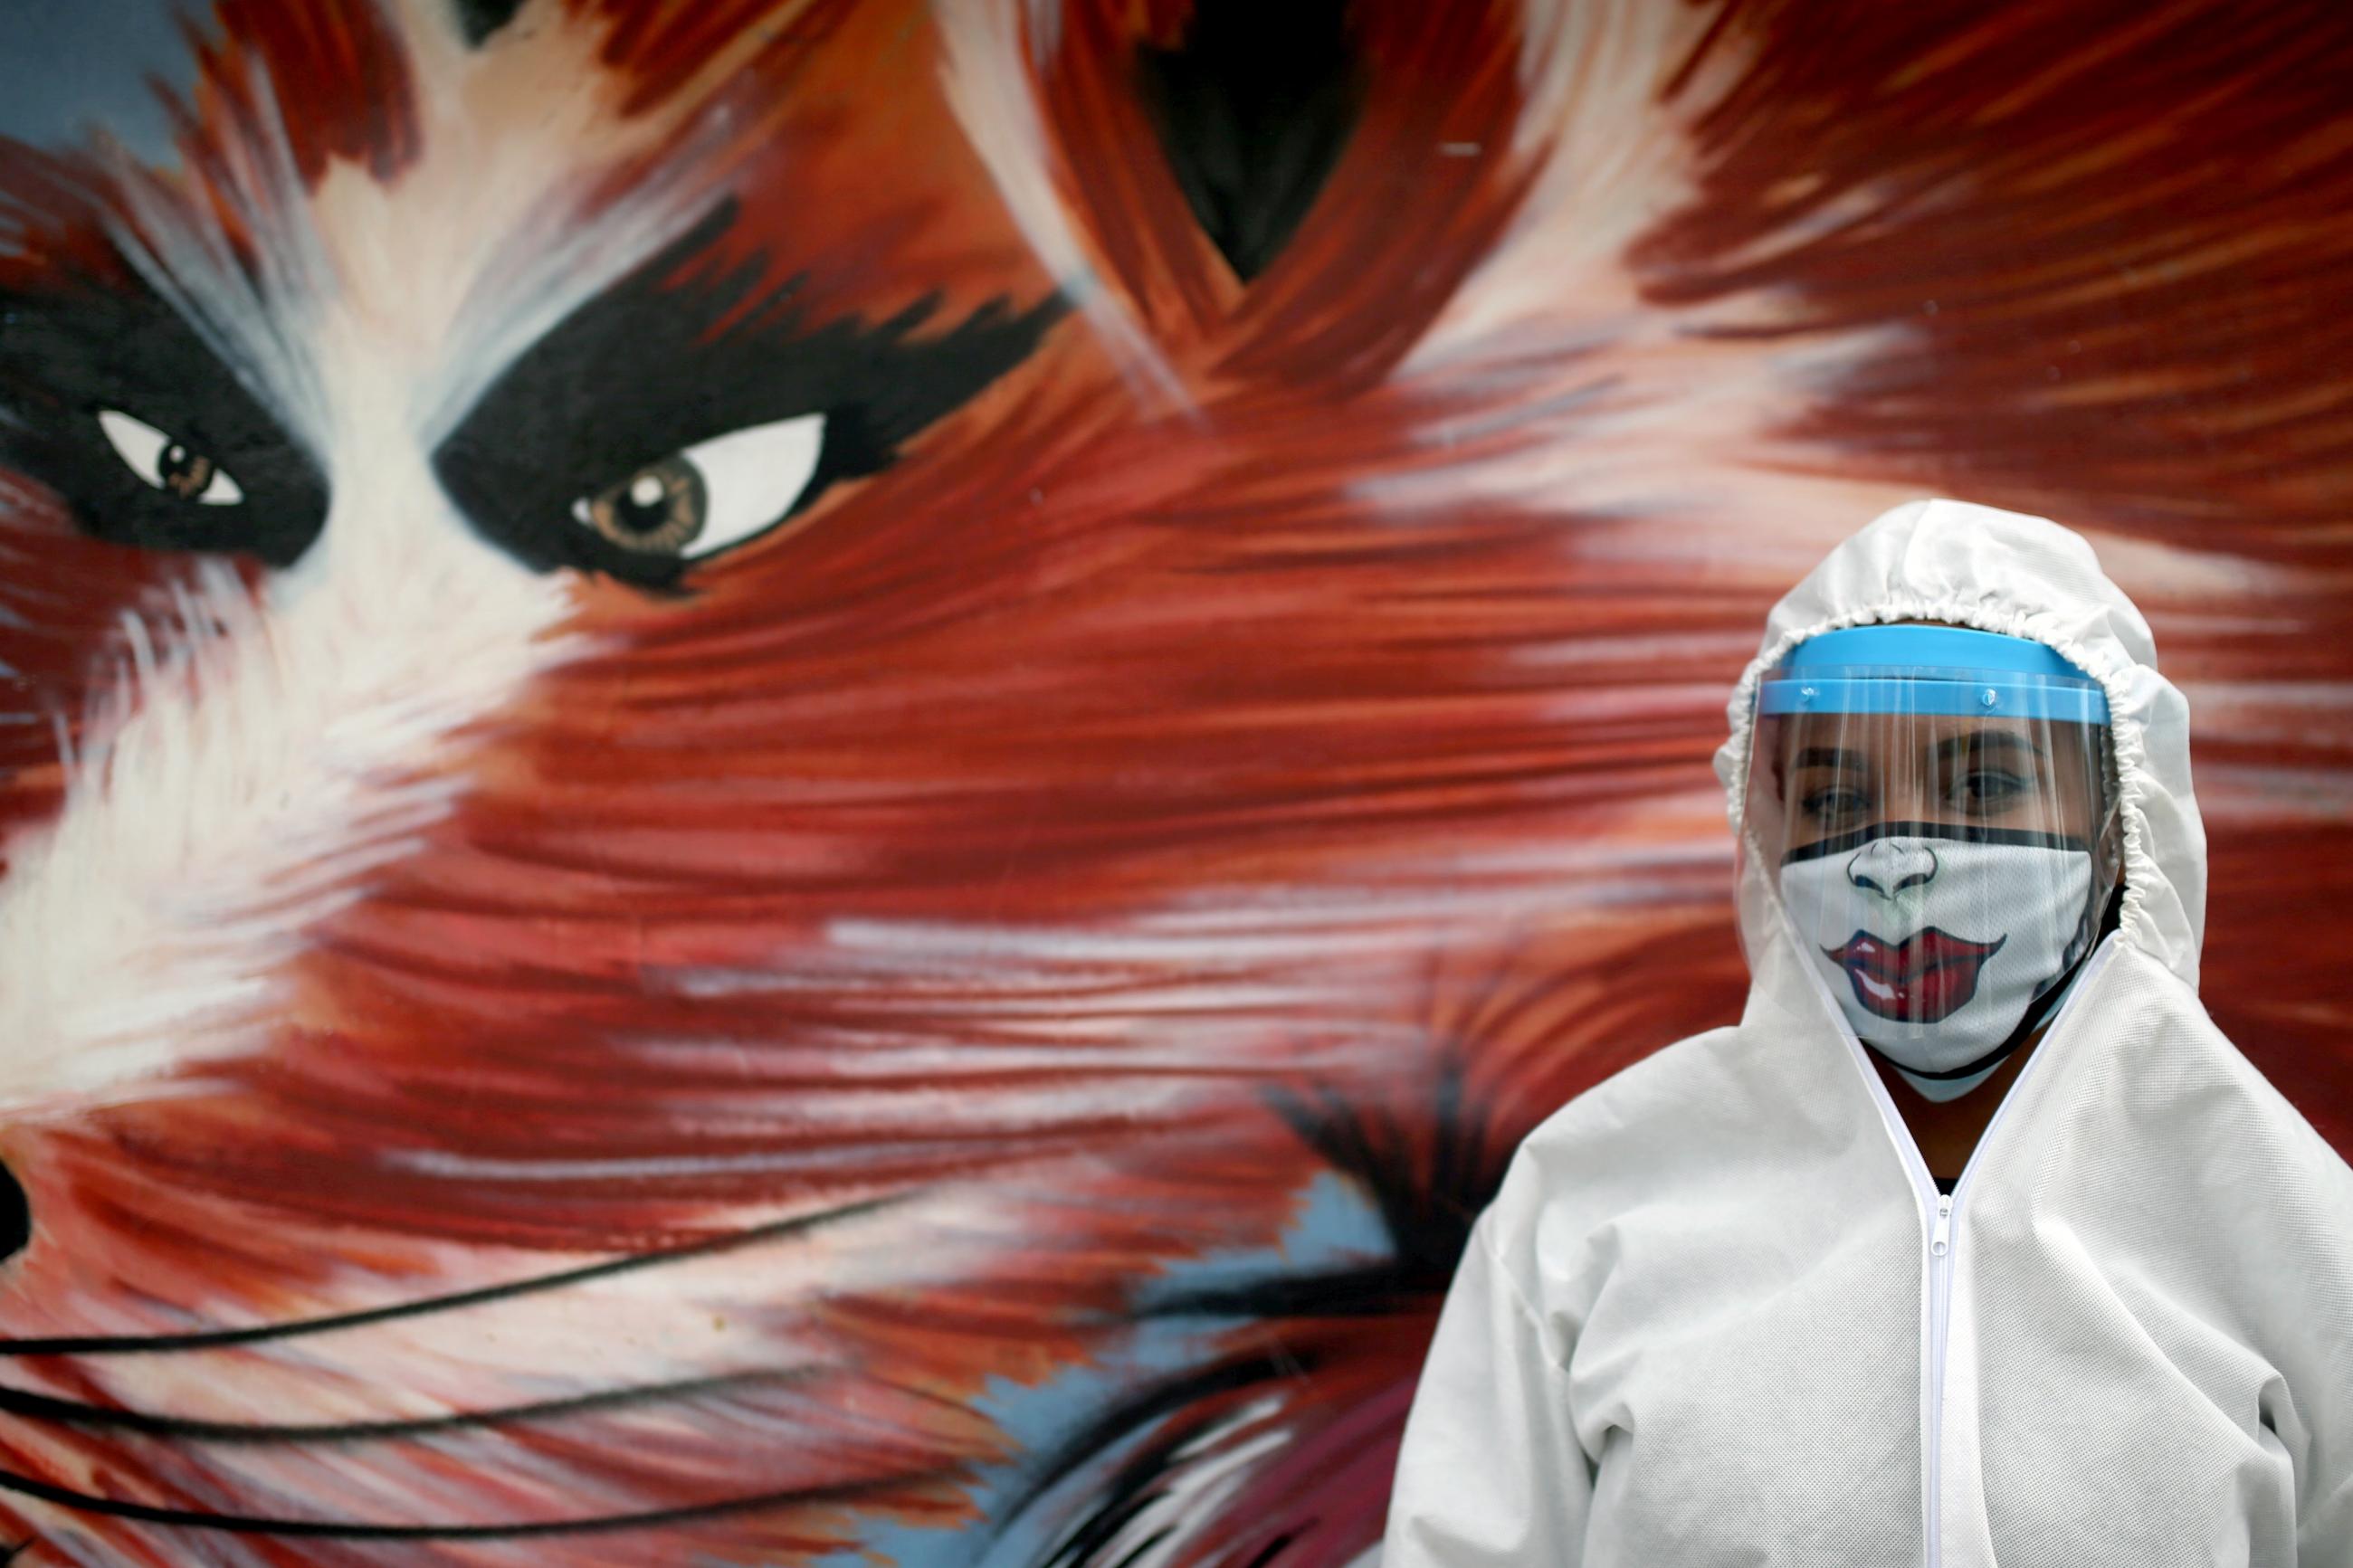 A city employee wearing protective gear poses for a photo during a citywide personal care day, amid the coronavirus disease outbreak in Bogota, Colombia on April 17, 2020.